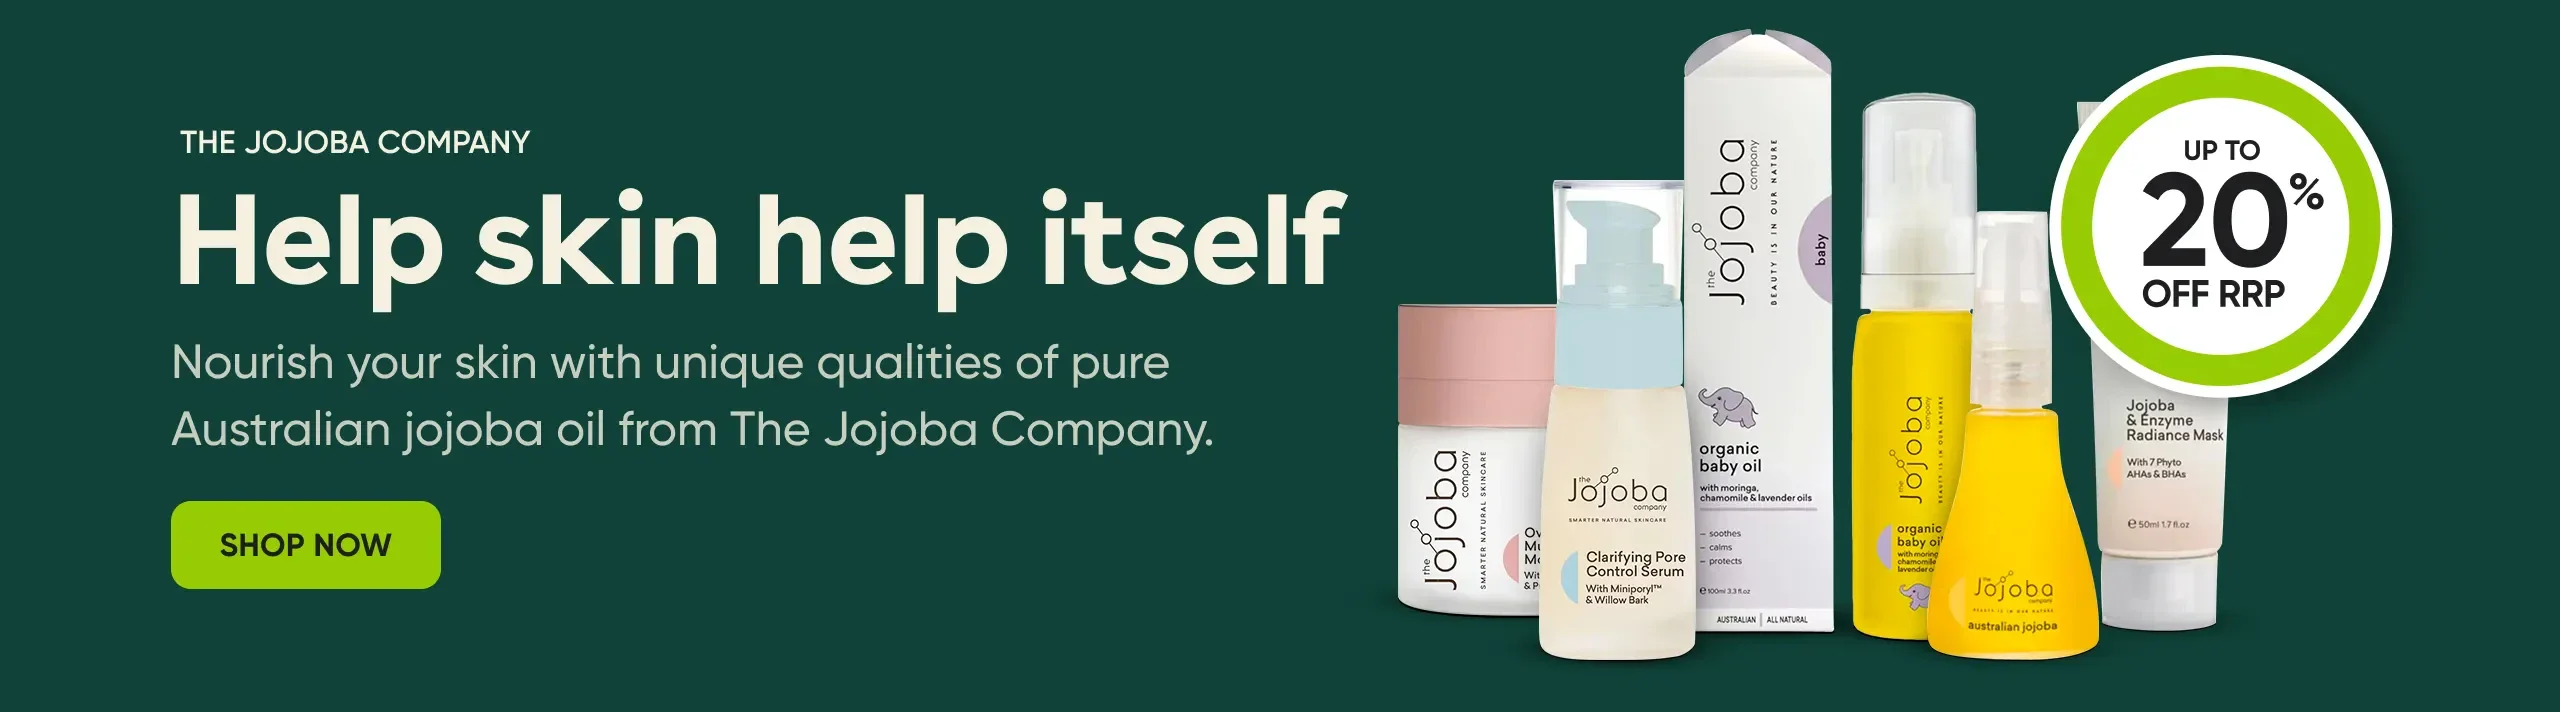 The Jojoba Company. Help skin help itself. Nourish your skin with unique qualities of pure Australian jojoba oil from The Jojoba Company.